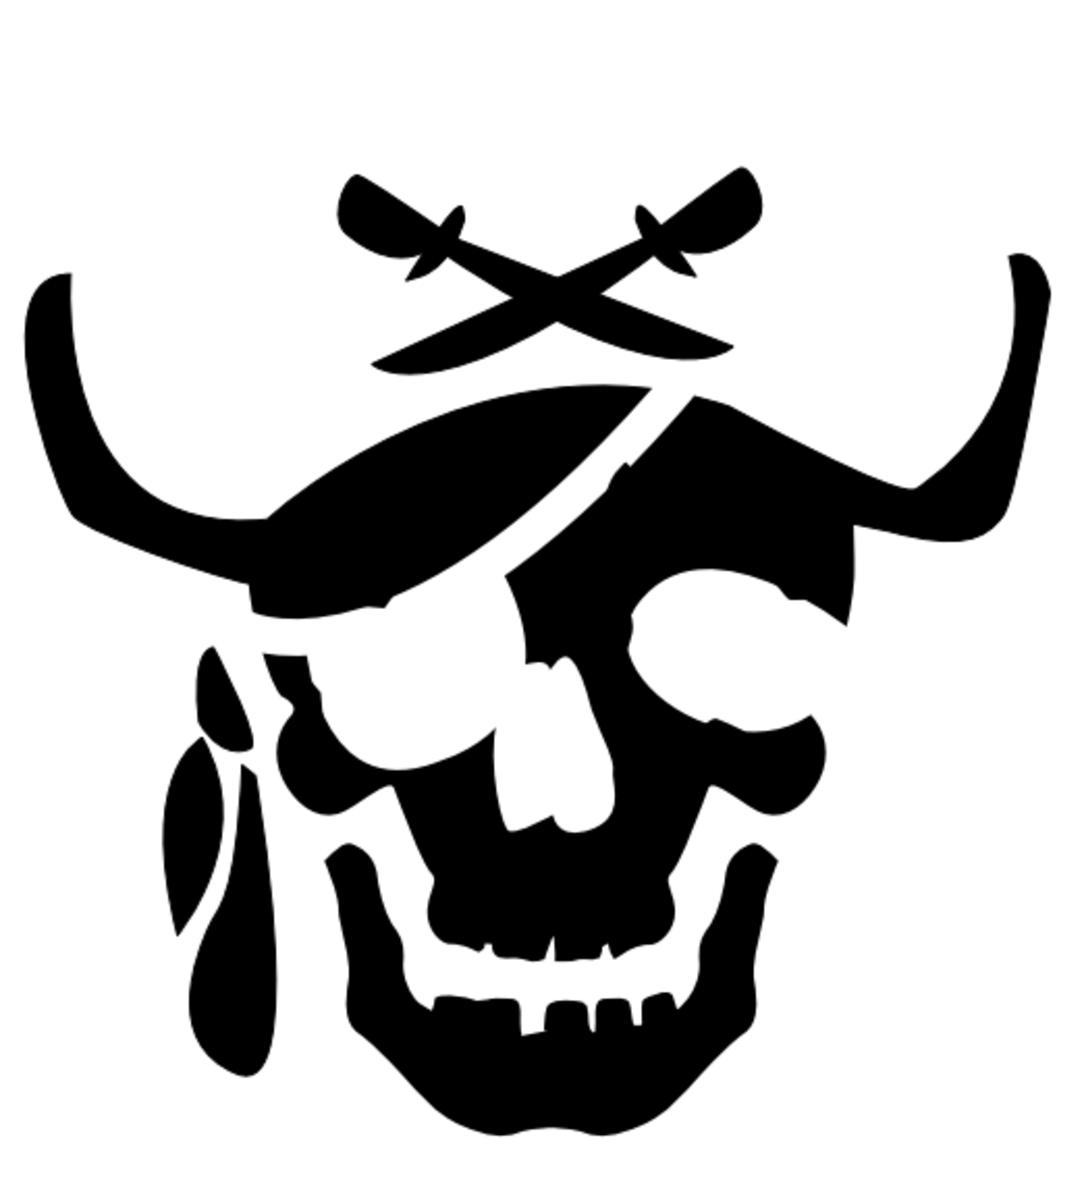 Pirate template for pumpkin carving